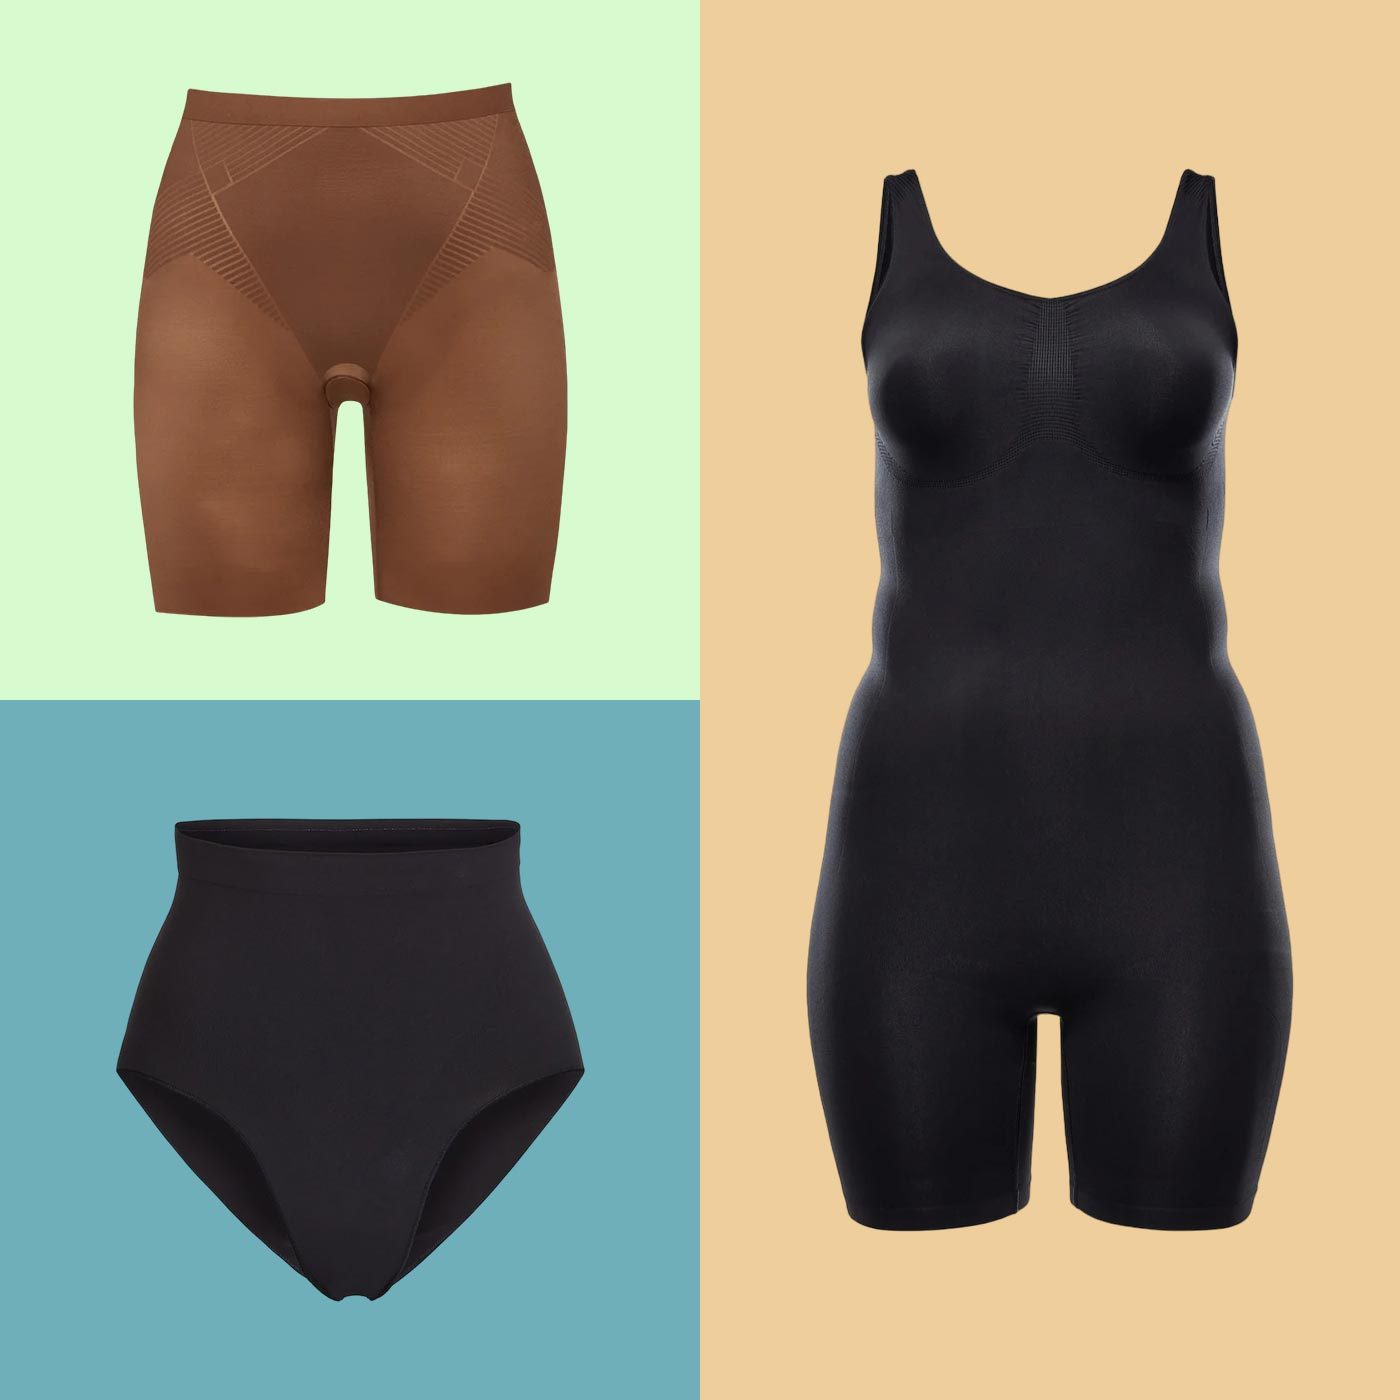 Types of Shapewear to Wear With a Backless Dress and Other Helpful